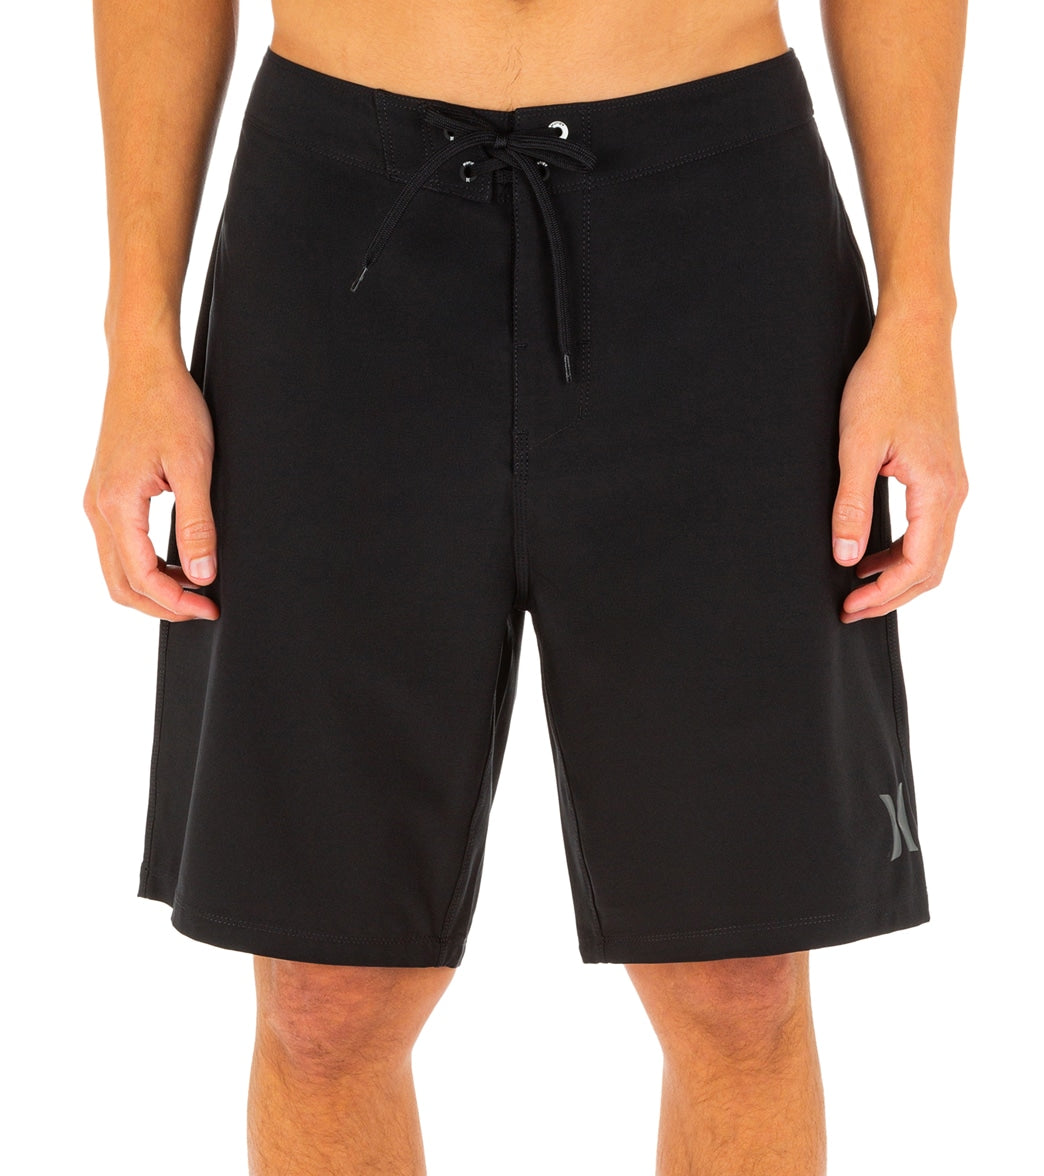 Hurley Phantom One And Only 20 Boardshorts - Black 31 - Swimoutlet.com